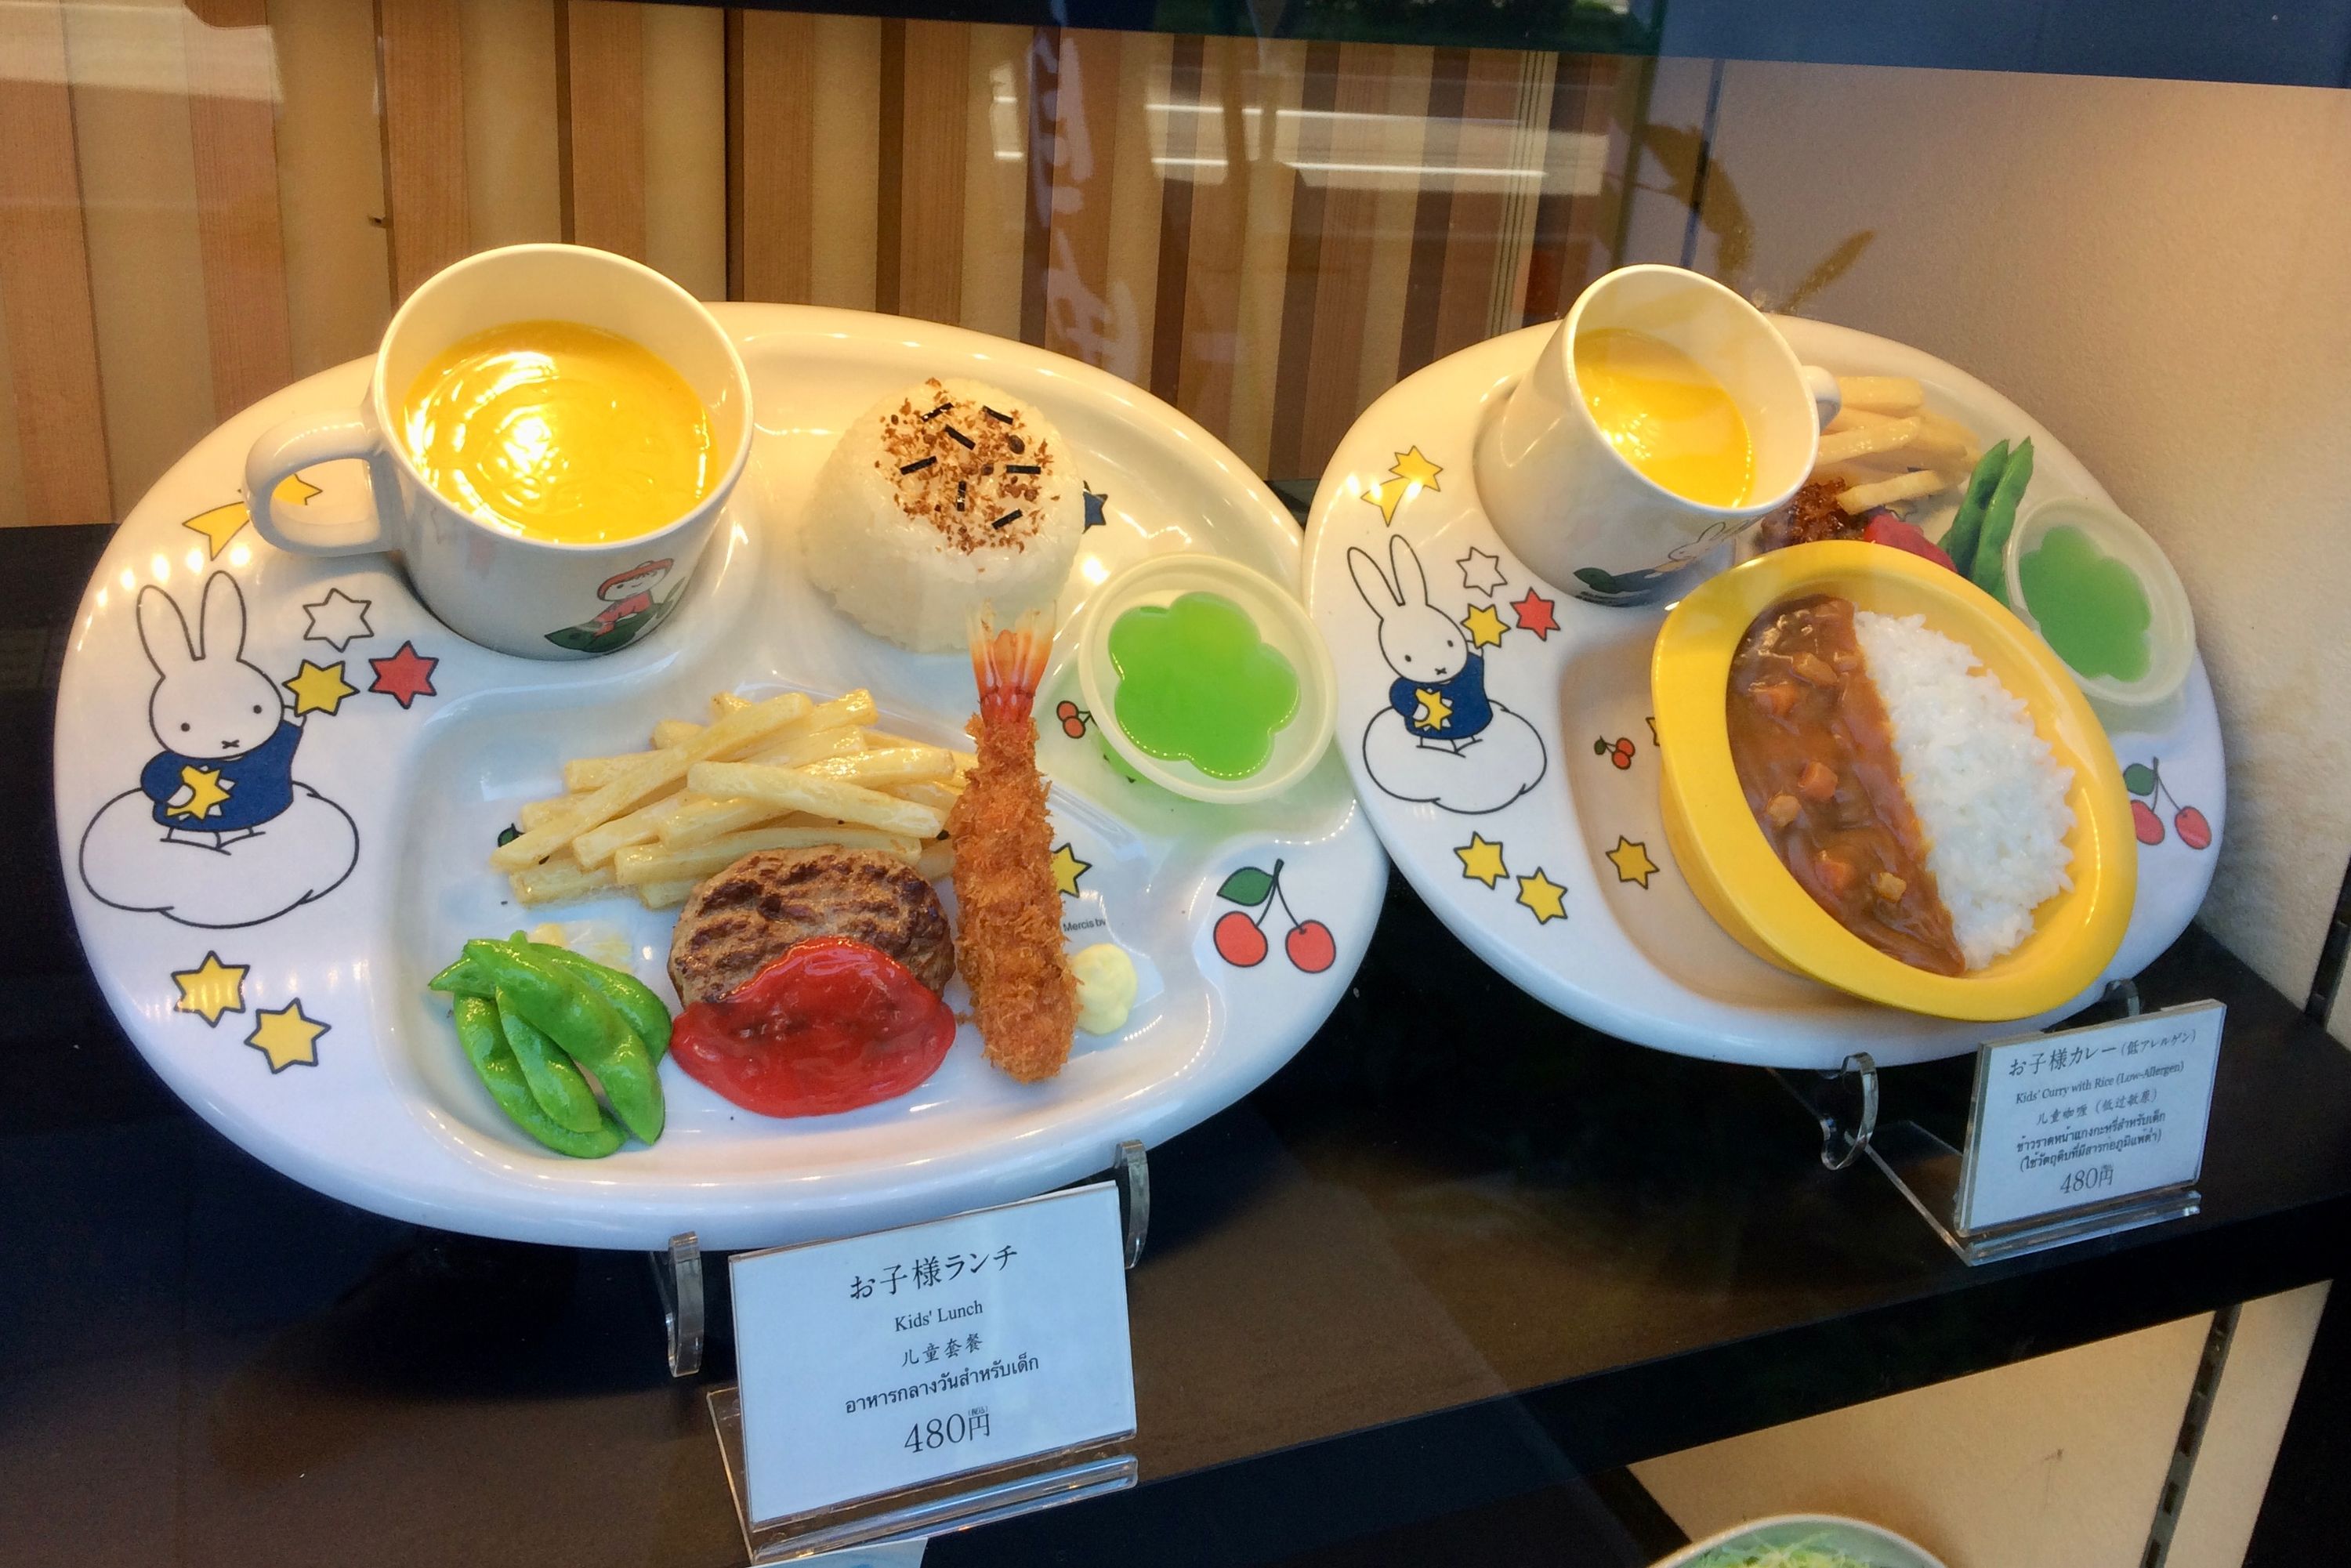 In the window of a restaurant, plastic kids’ meals set on Miffy-themed trays.